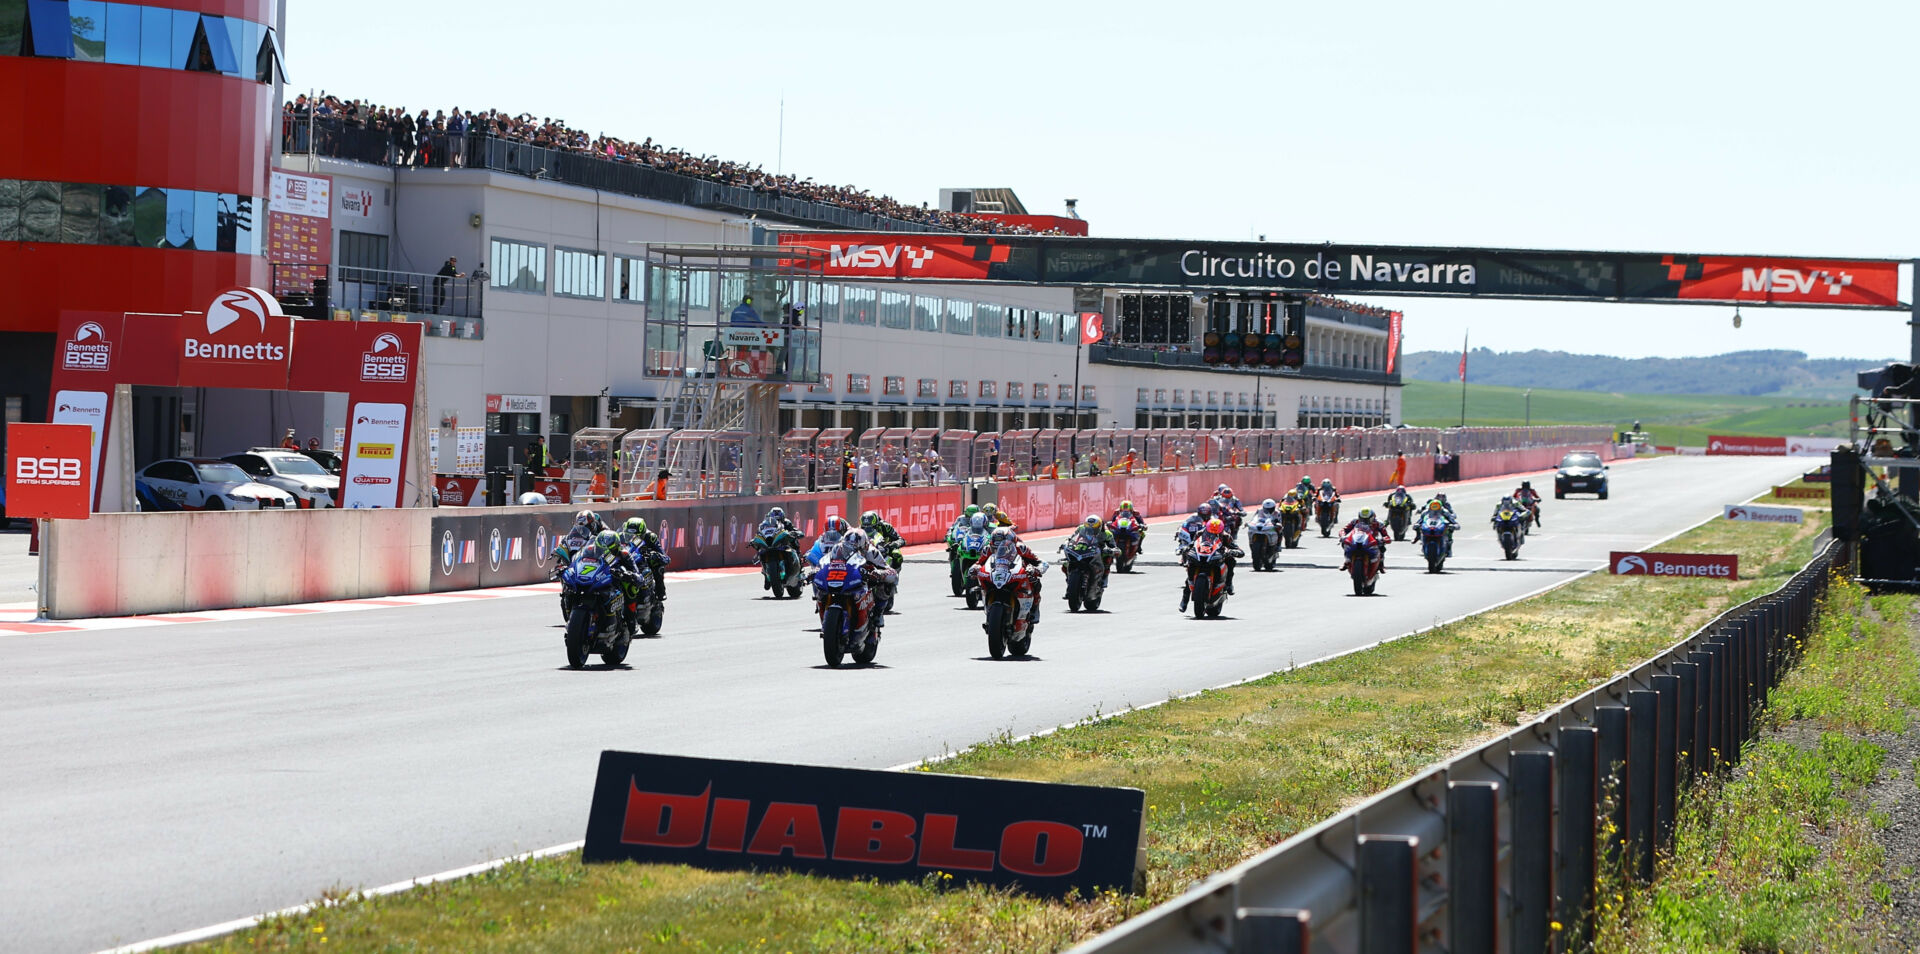 Ryan Vickers (7) leads the start of a British Superbike race at Navarra. Photo courtesy MSVR.